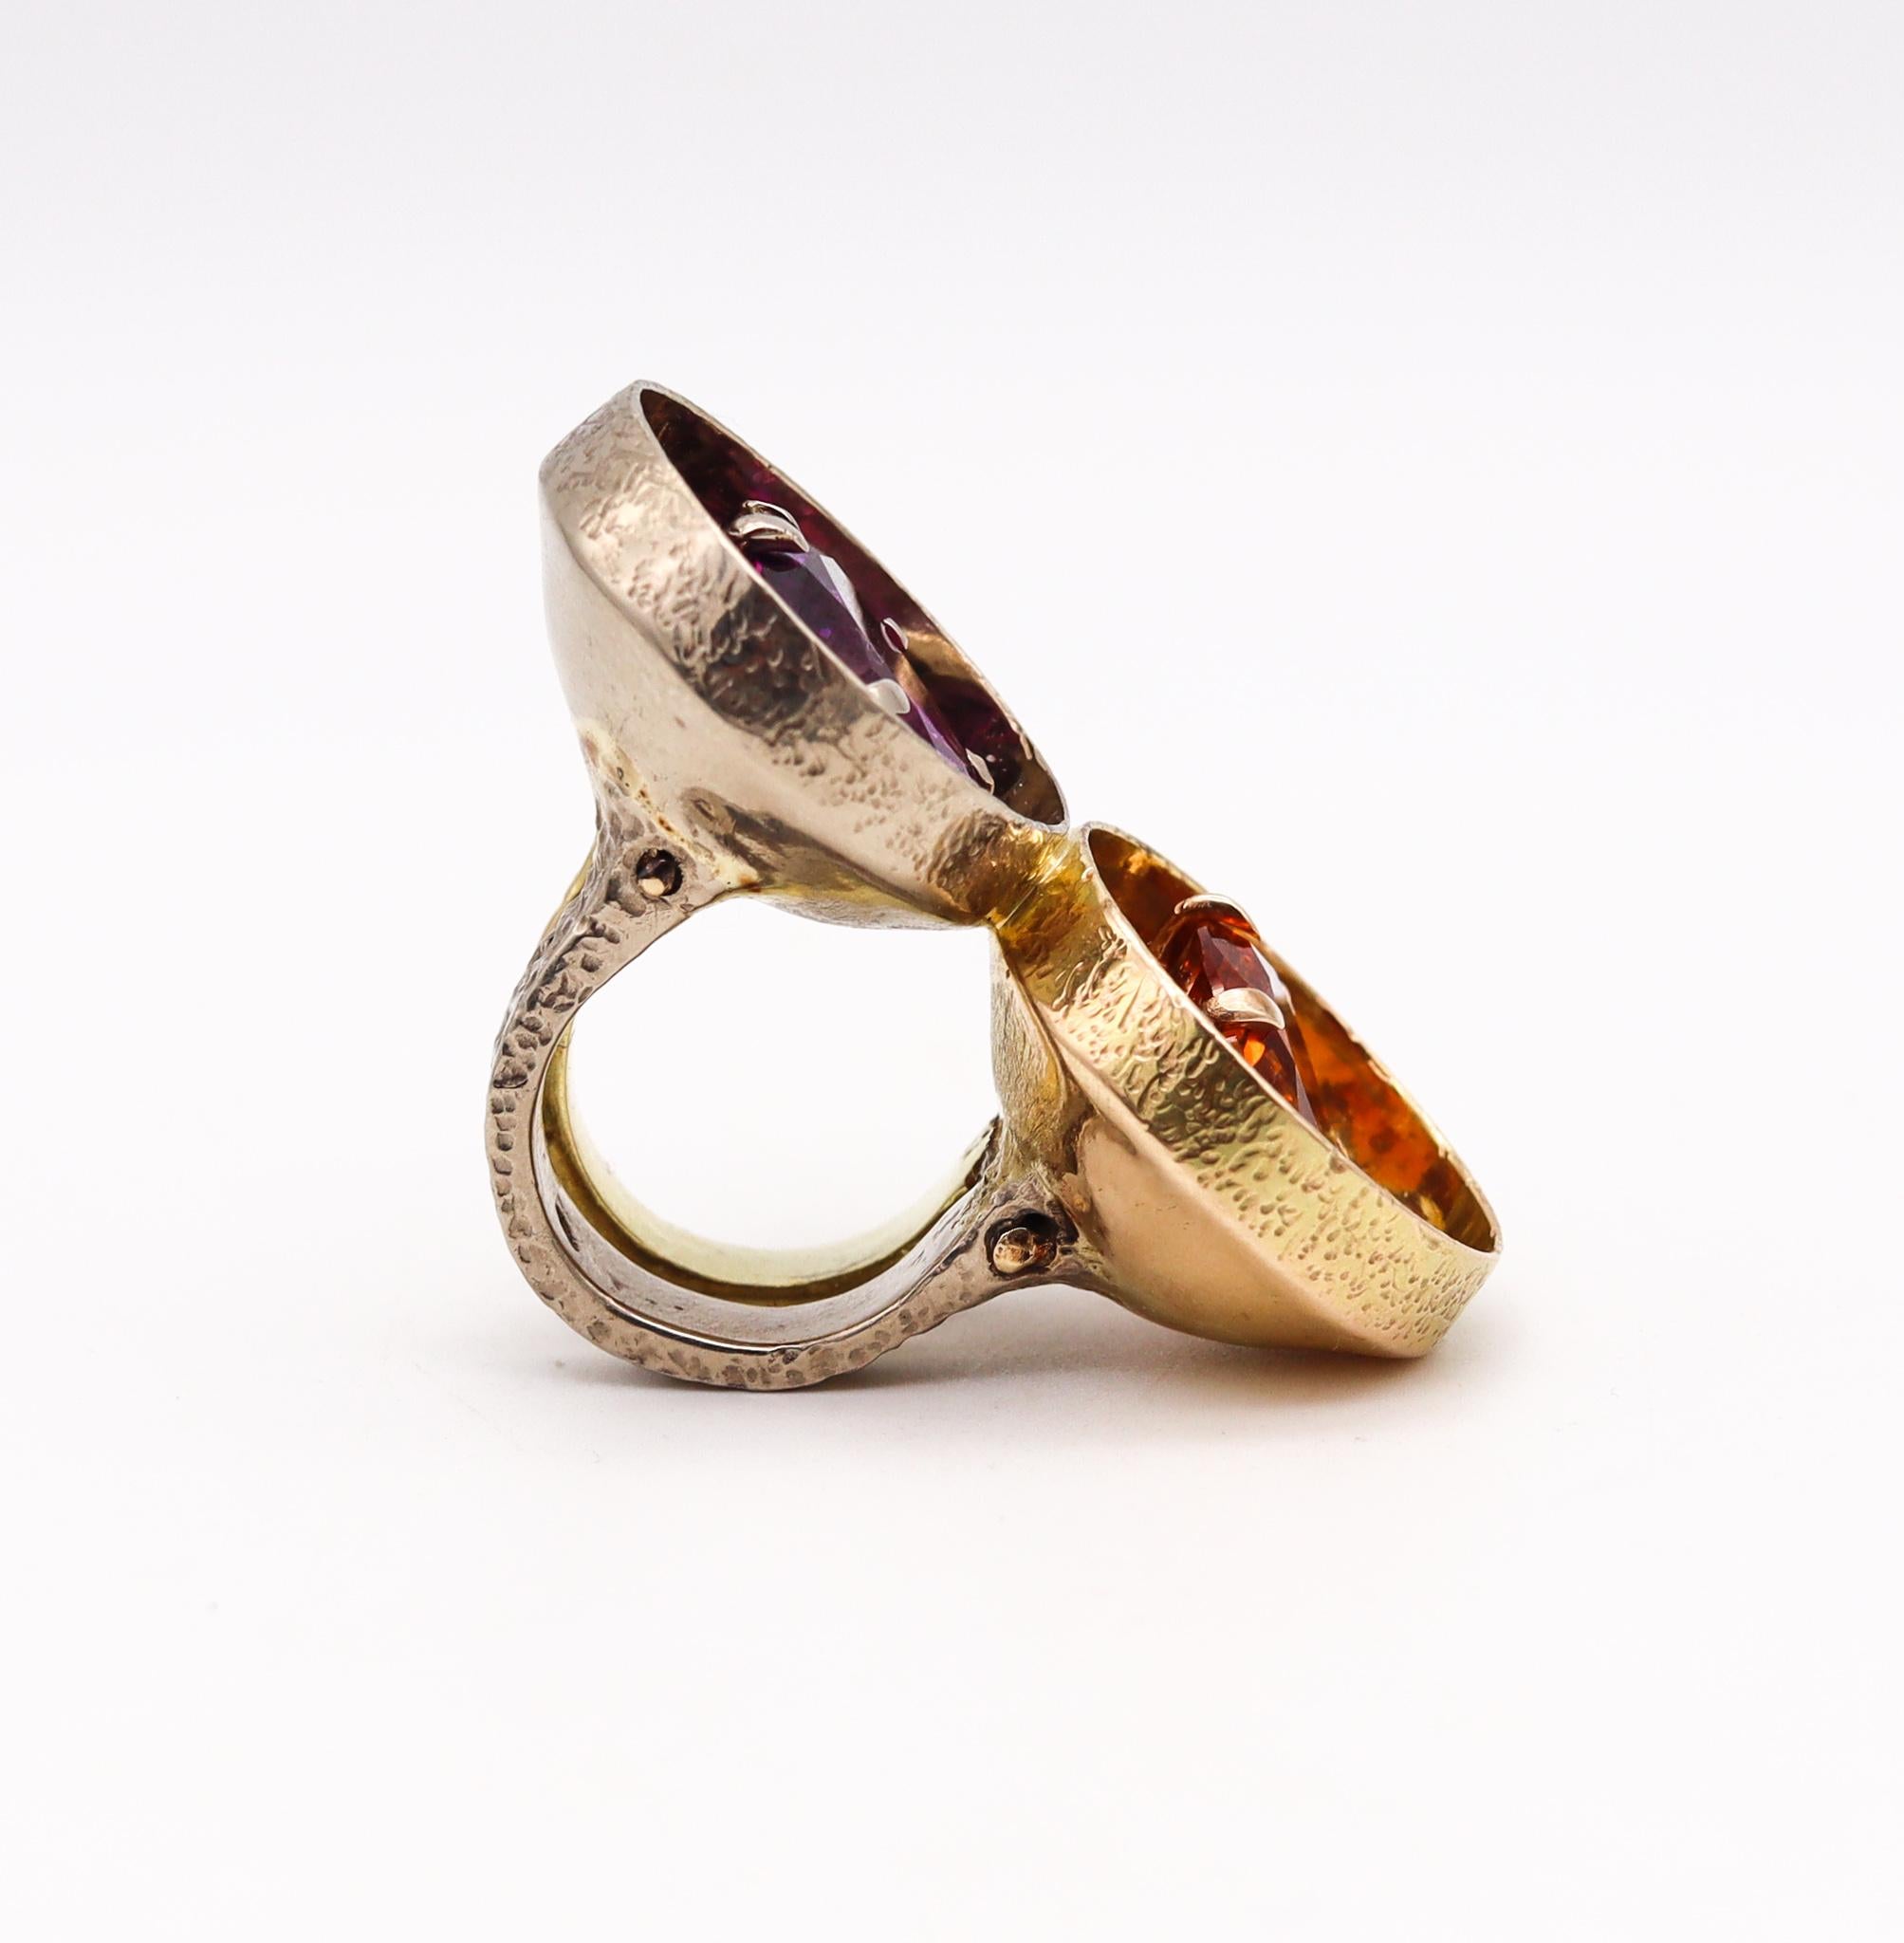 Modernist Kinetic Cocktail Ring.

Fabulous, extravagant and psychedelic piece, created back at the beginning of the 1970's. The design of this sculptural ring is composed by a mix of modernism, brutalist, kinetic art and op-art. Made up with two